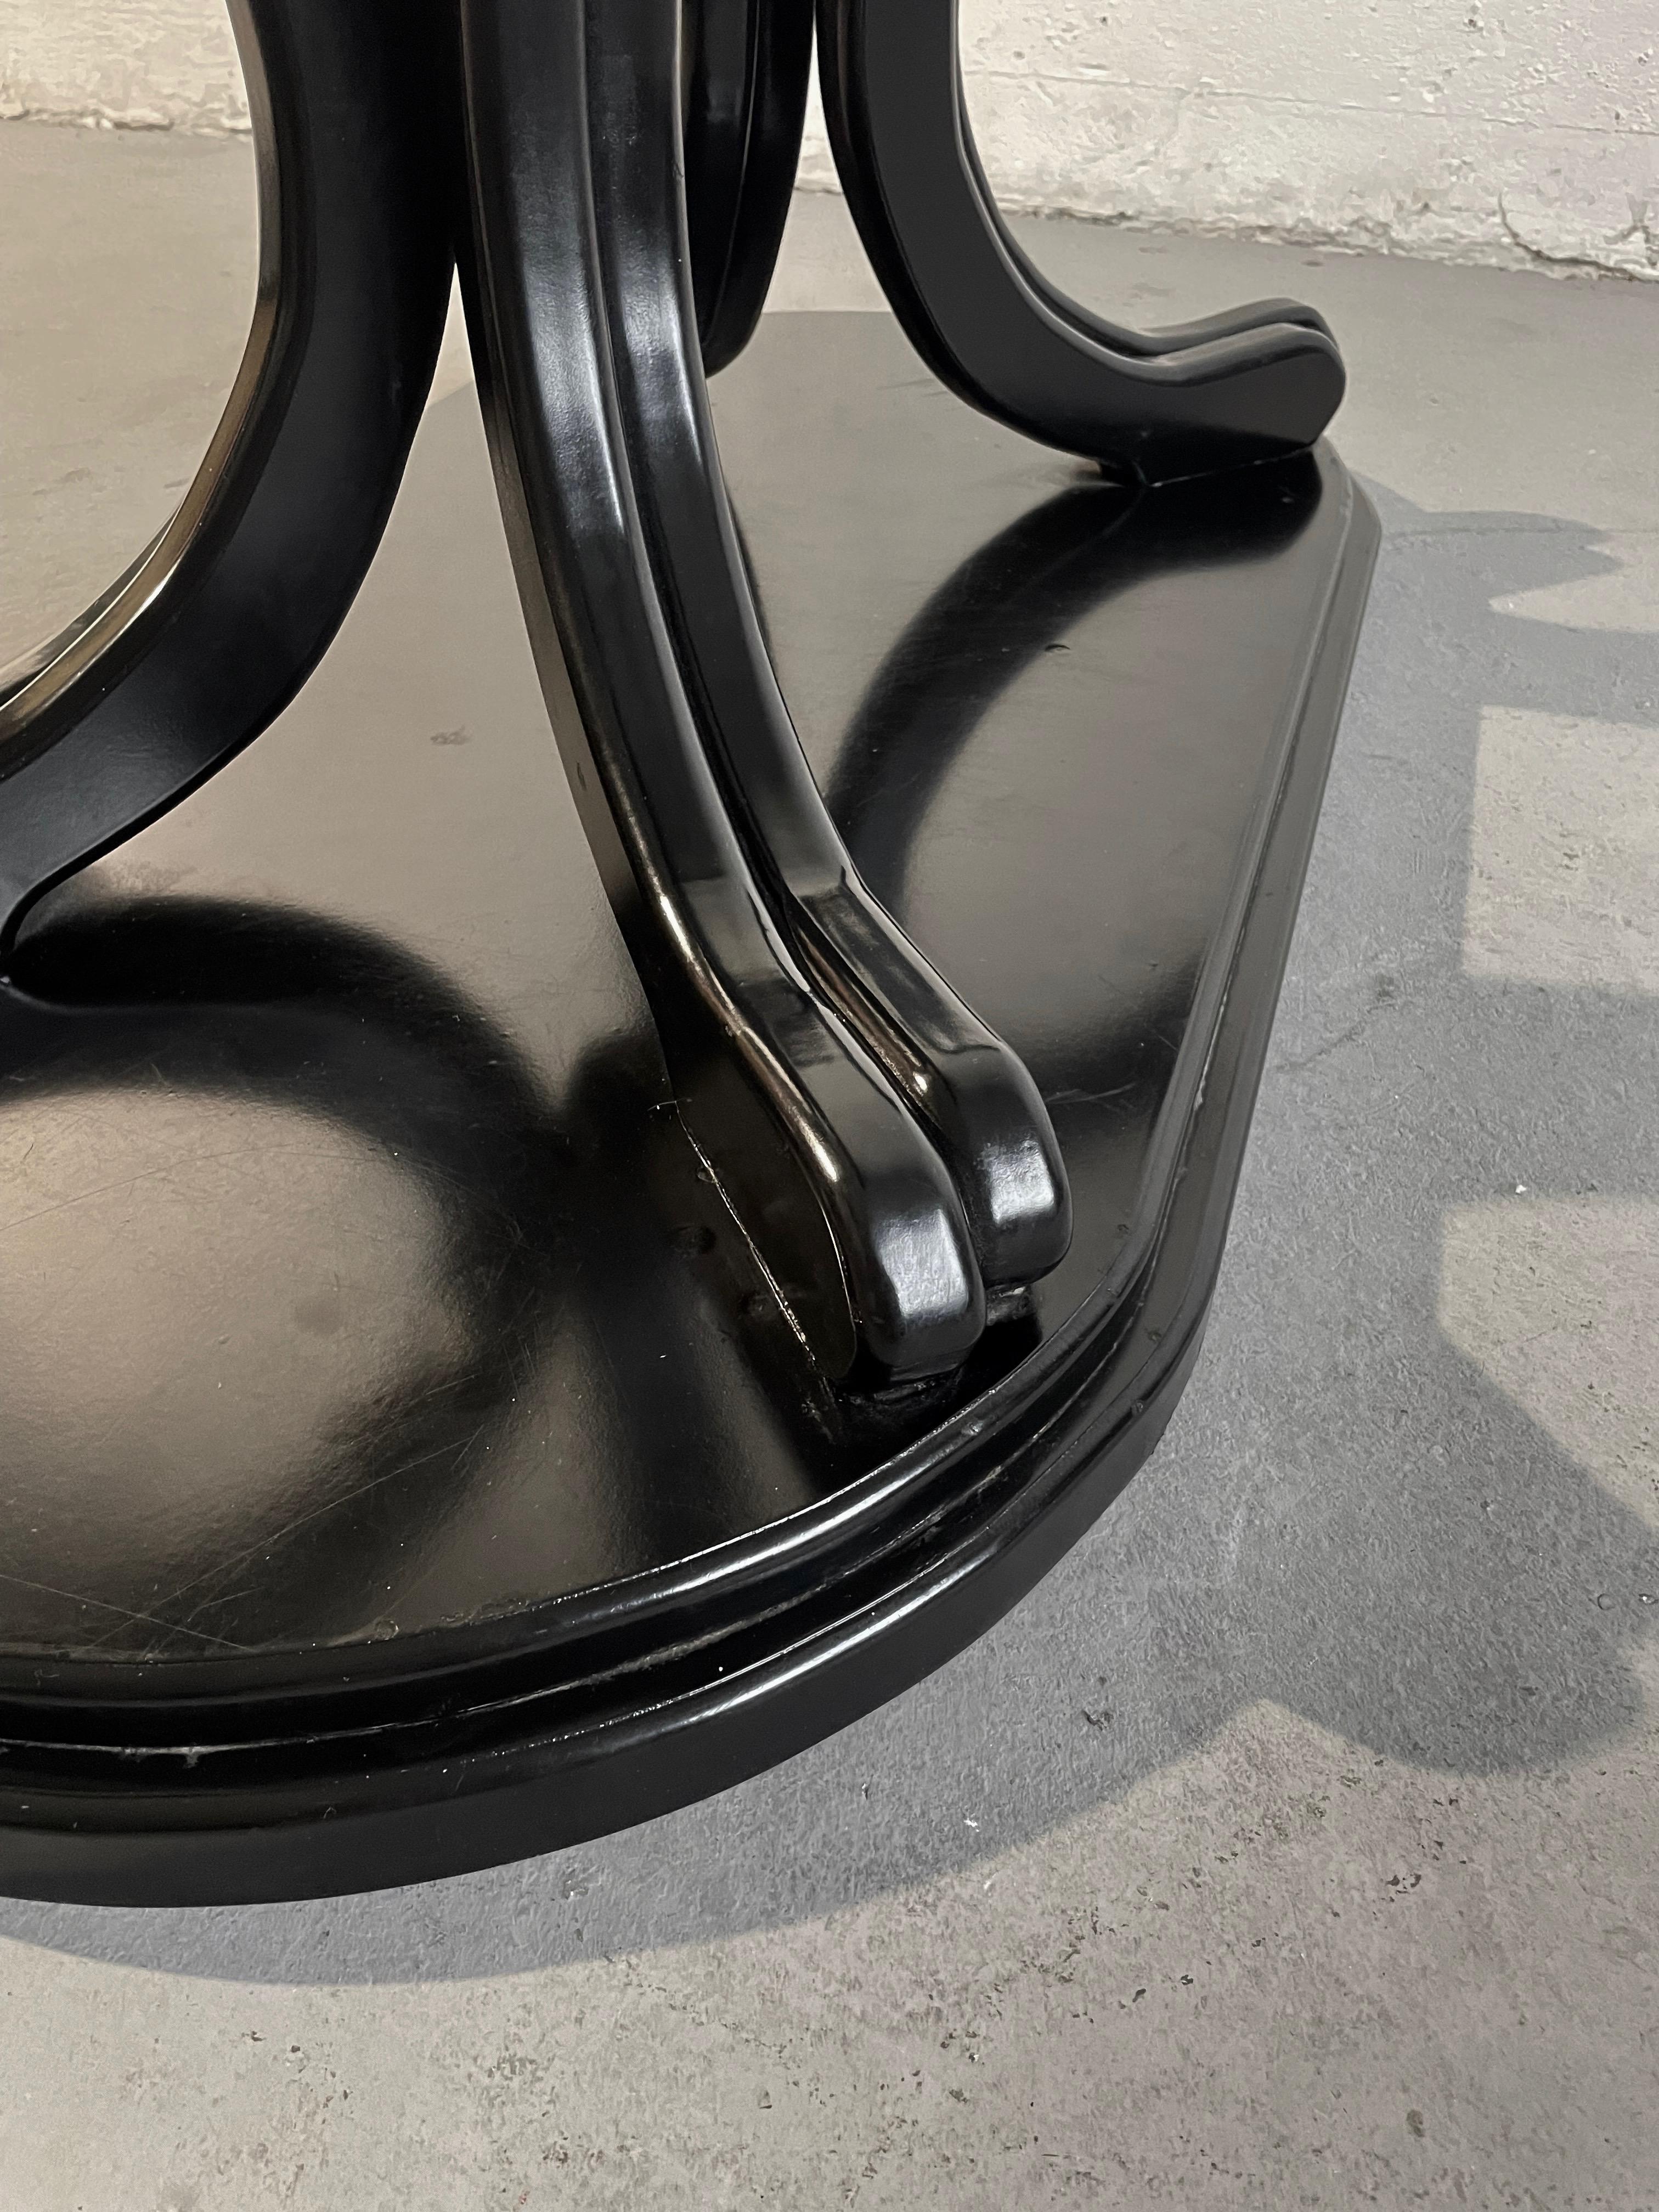 Vintage Postmodern Italian Coffee Table, Black Lacquered Wood and Glass, 1980s For Sale 2